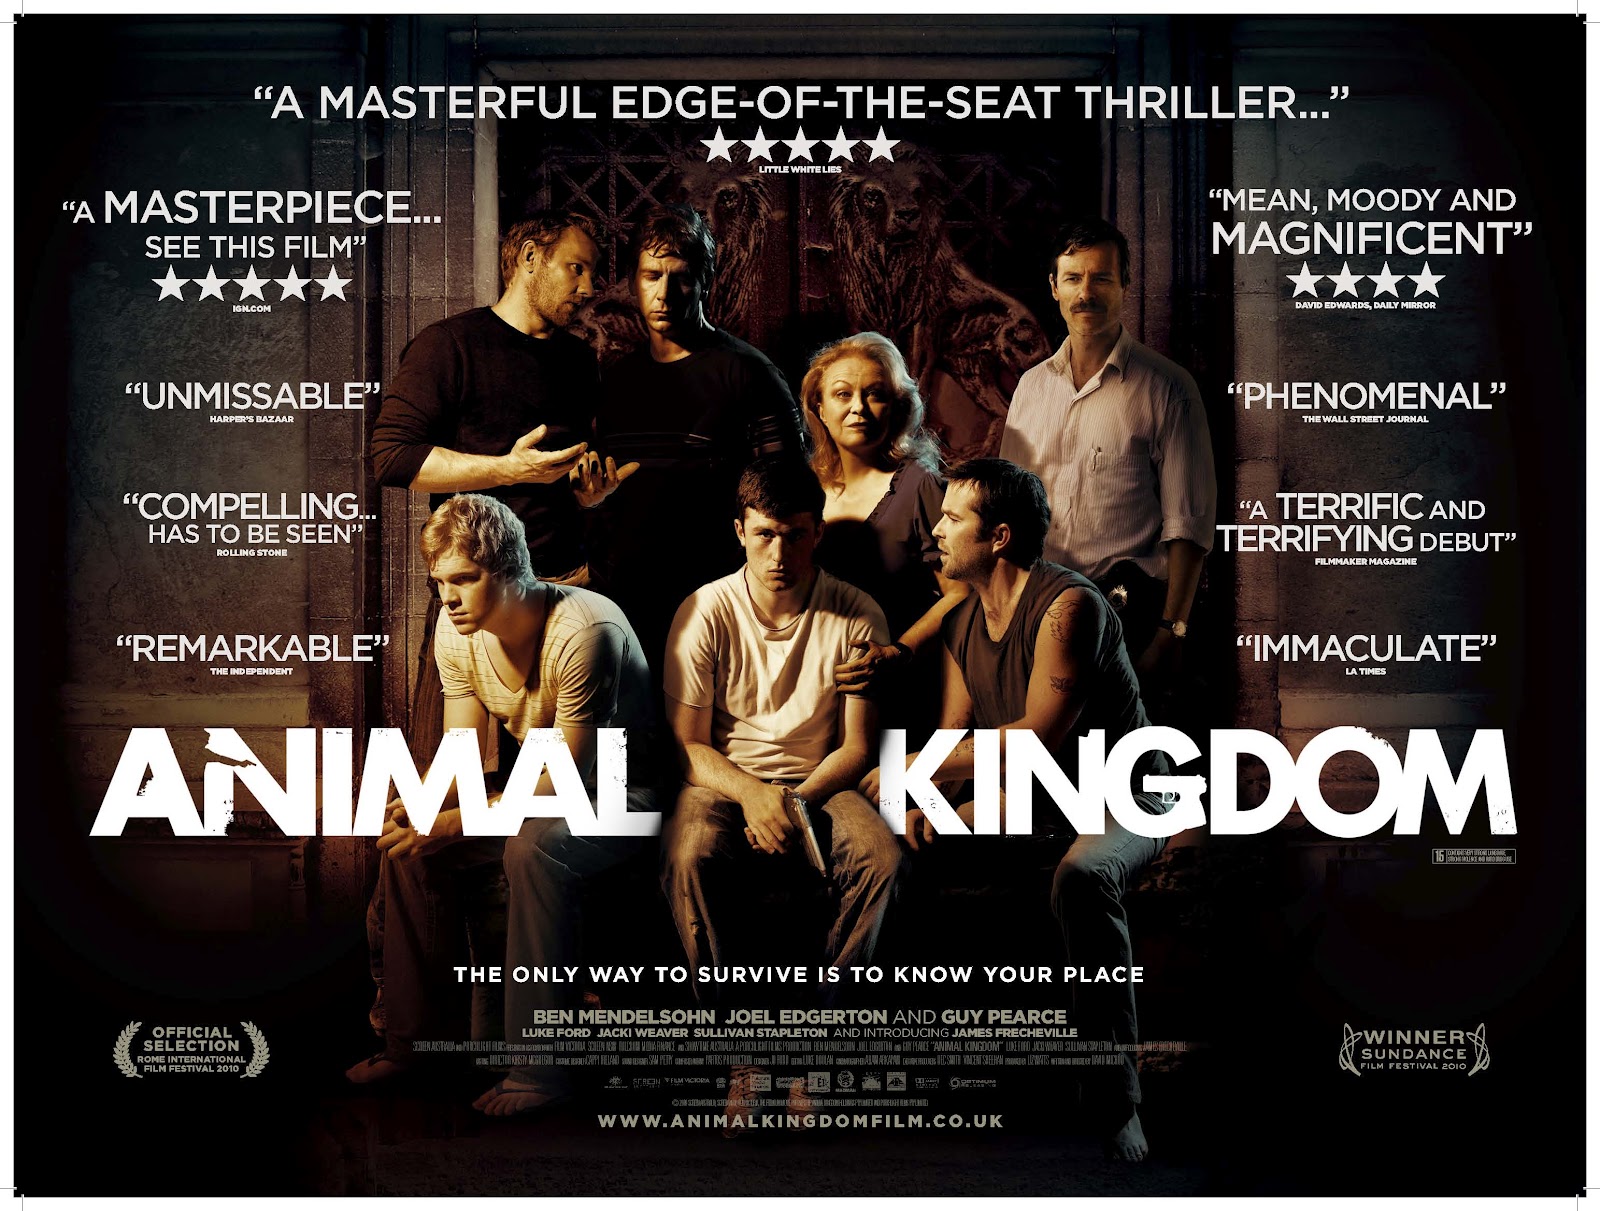 Animal Kingdom (2010) Movie Poster and DVD Cover Art